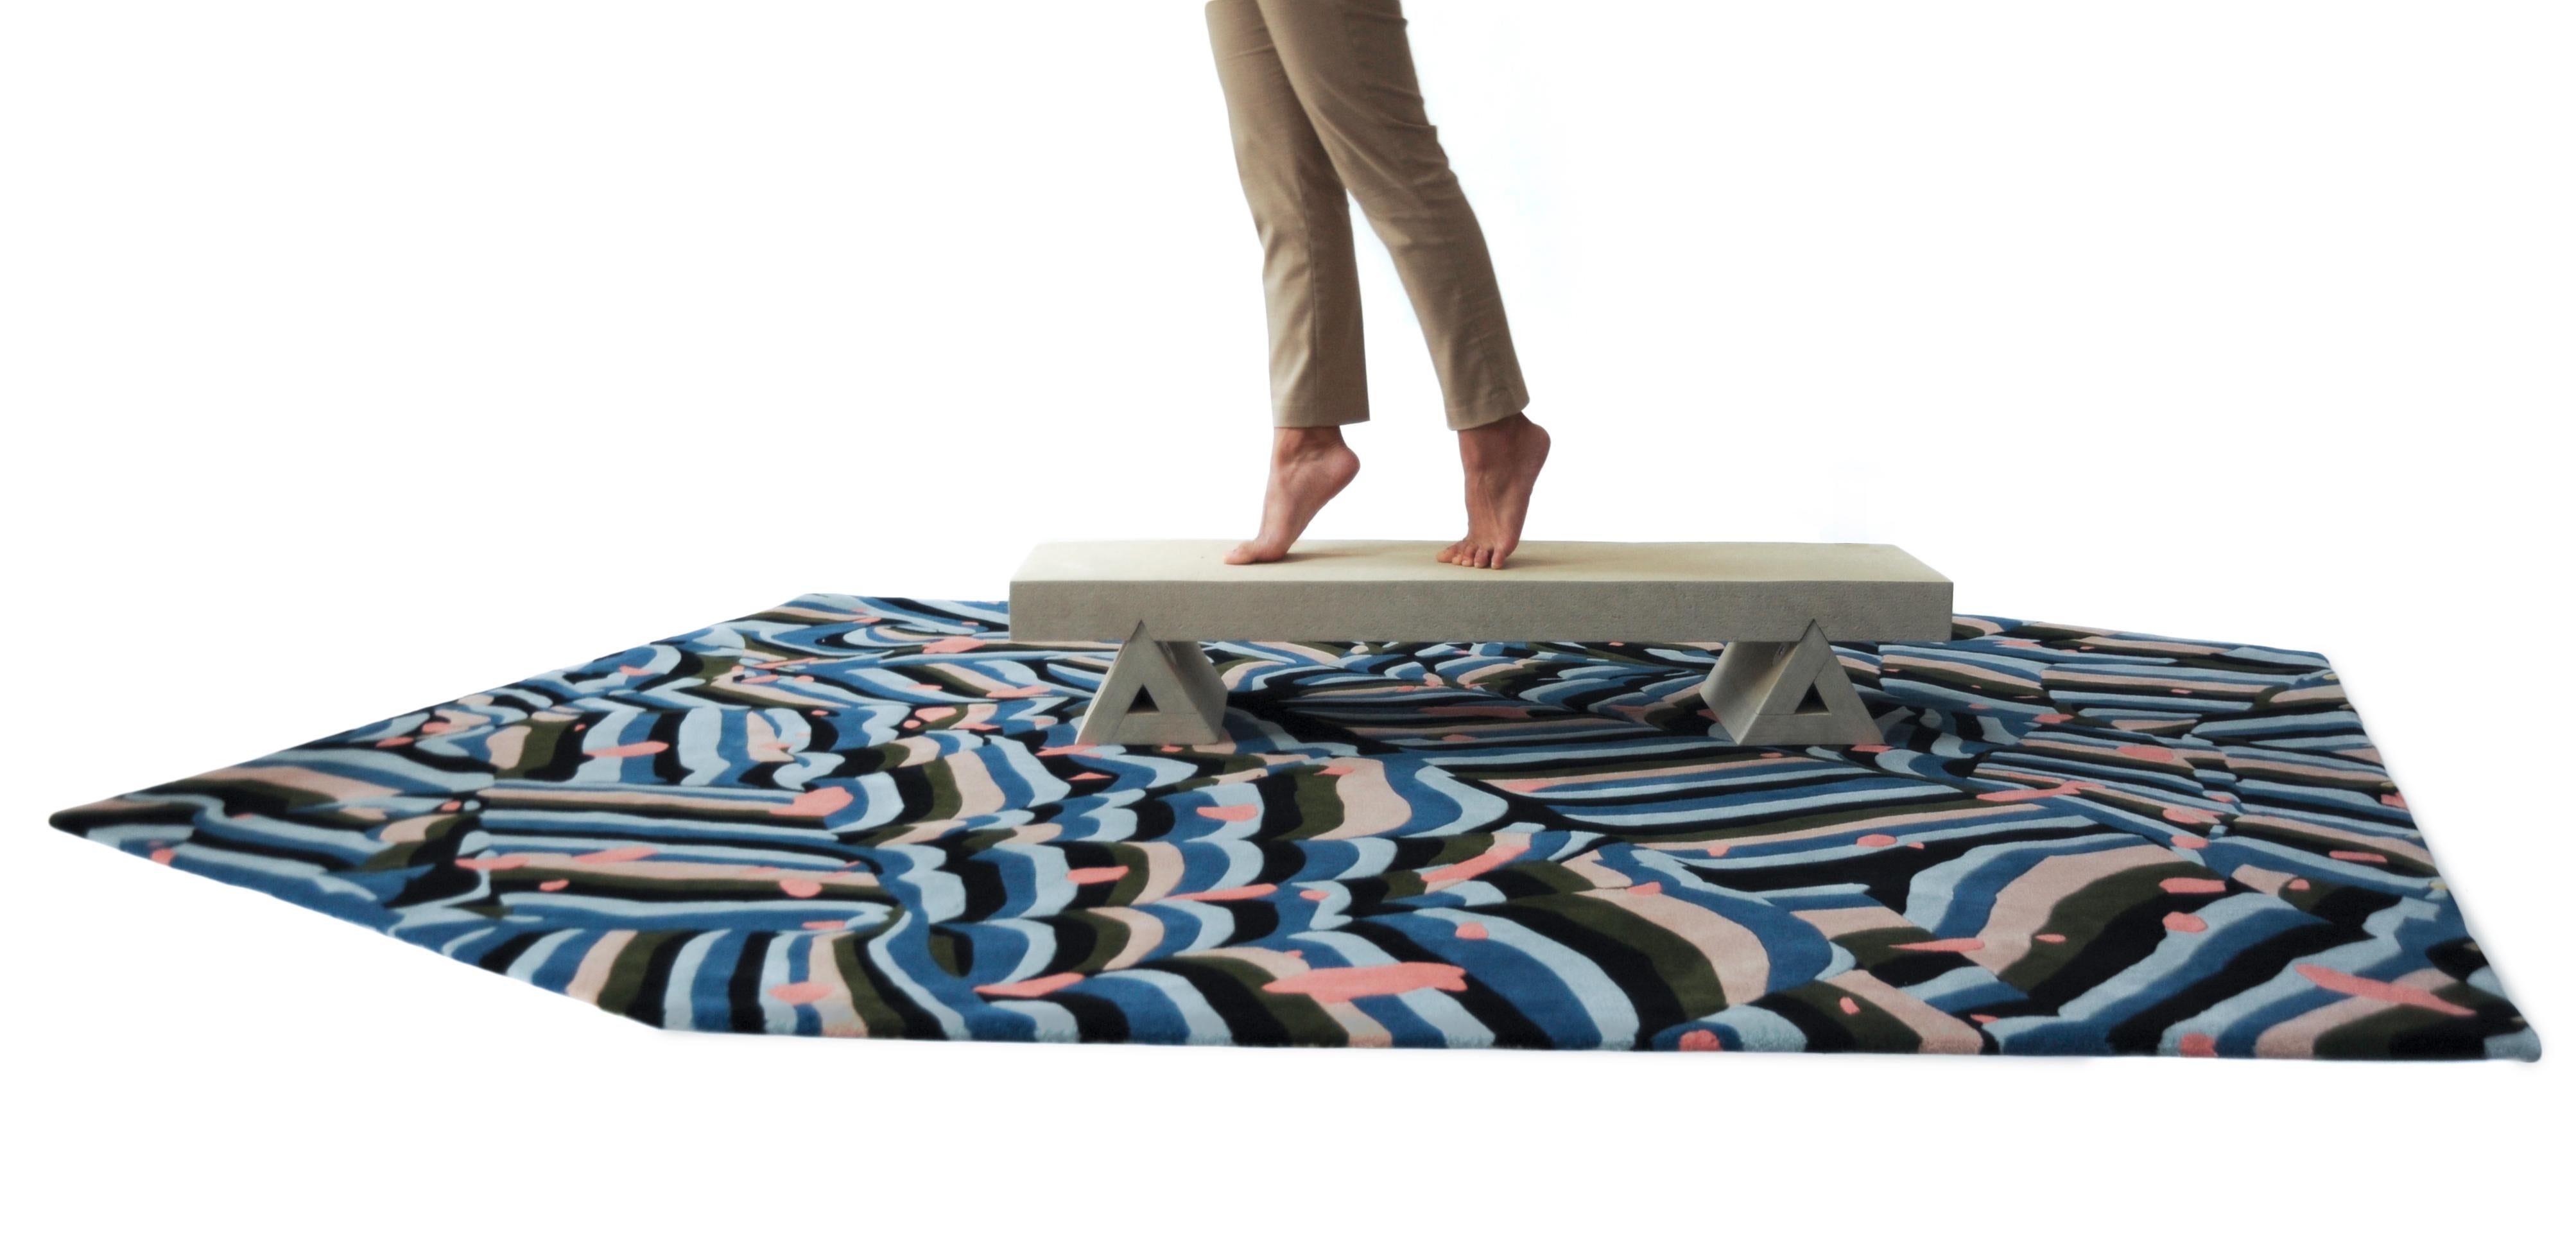 Hand-Crafted Banner Rug by Cody Hoyt + kinder MODERN in 100% New Zealand Wool For Sale